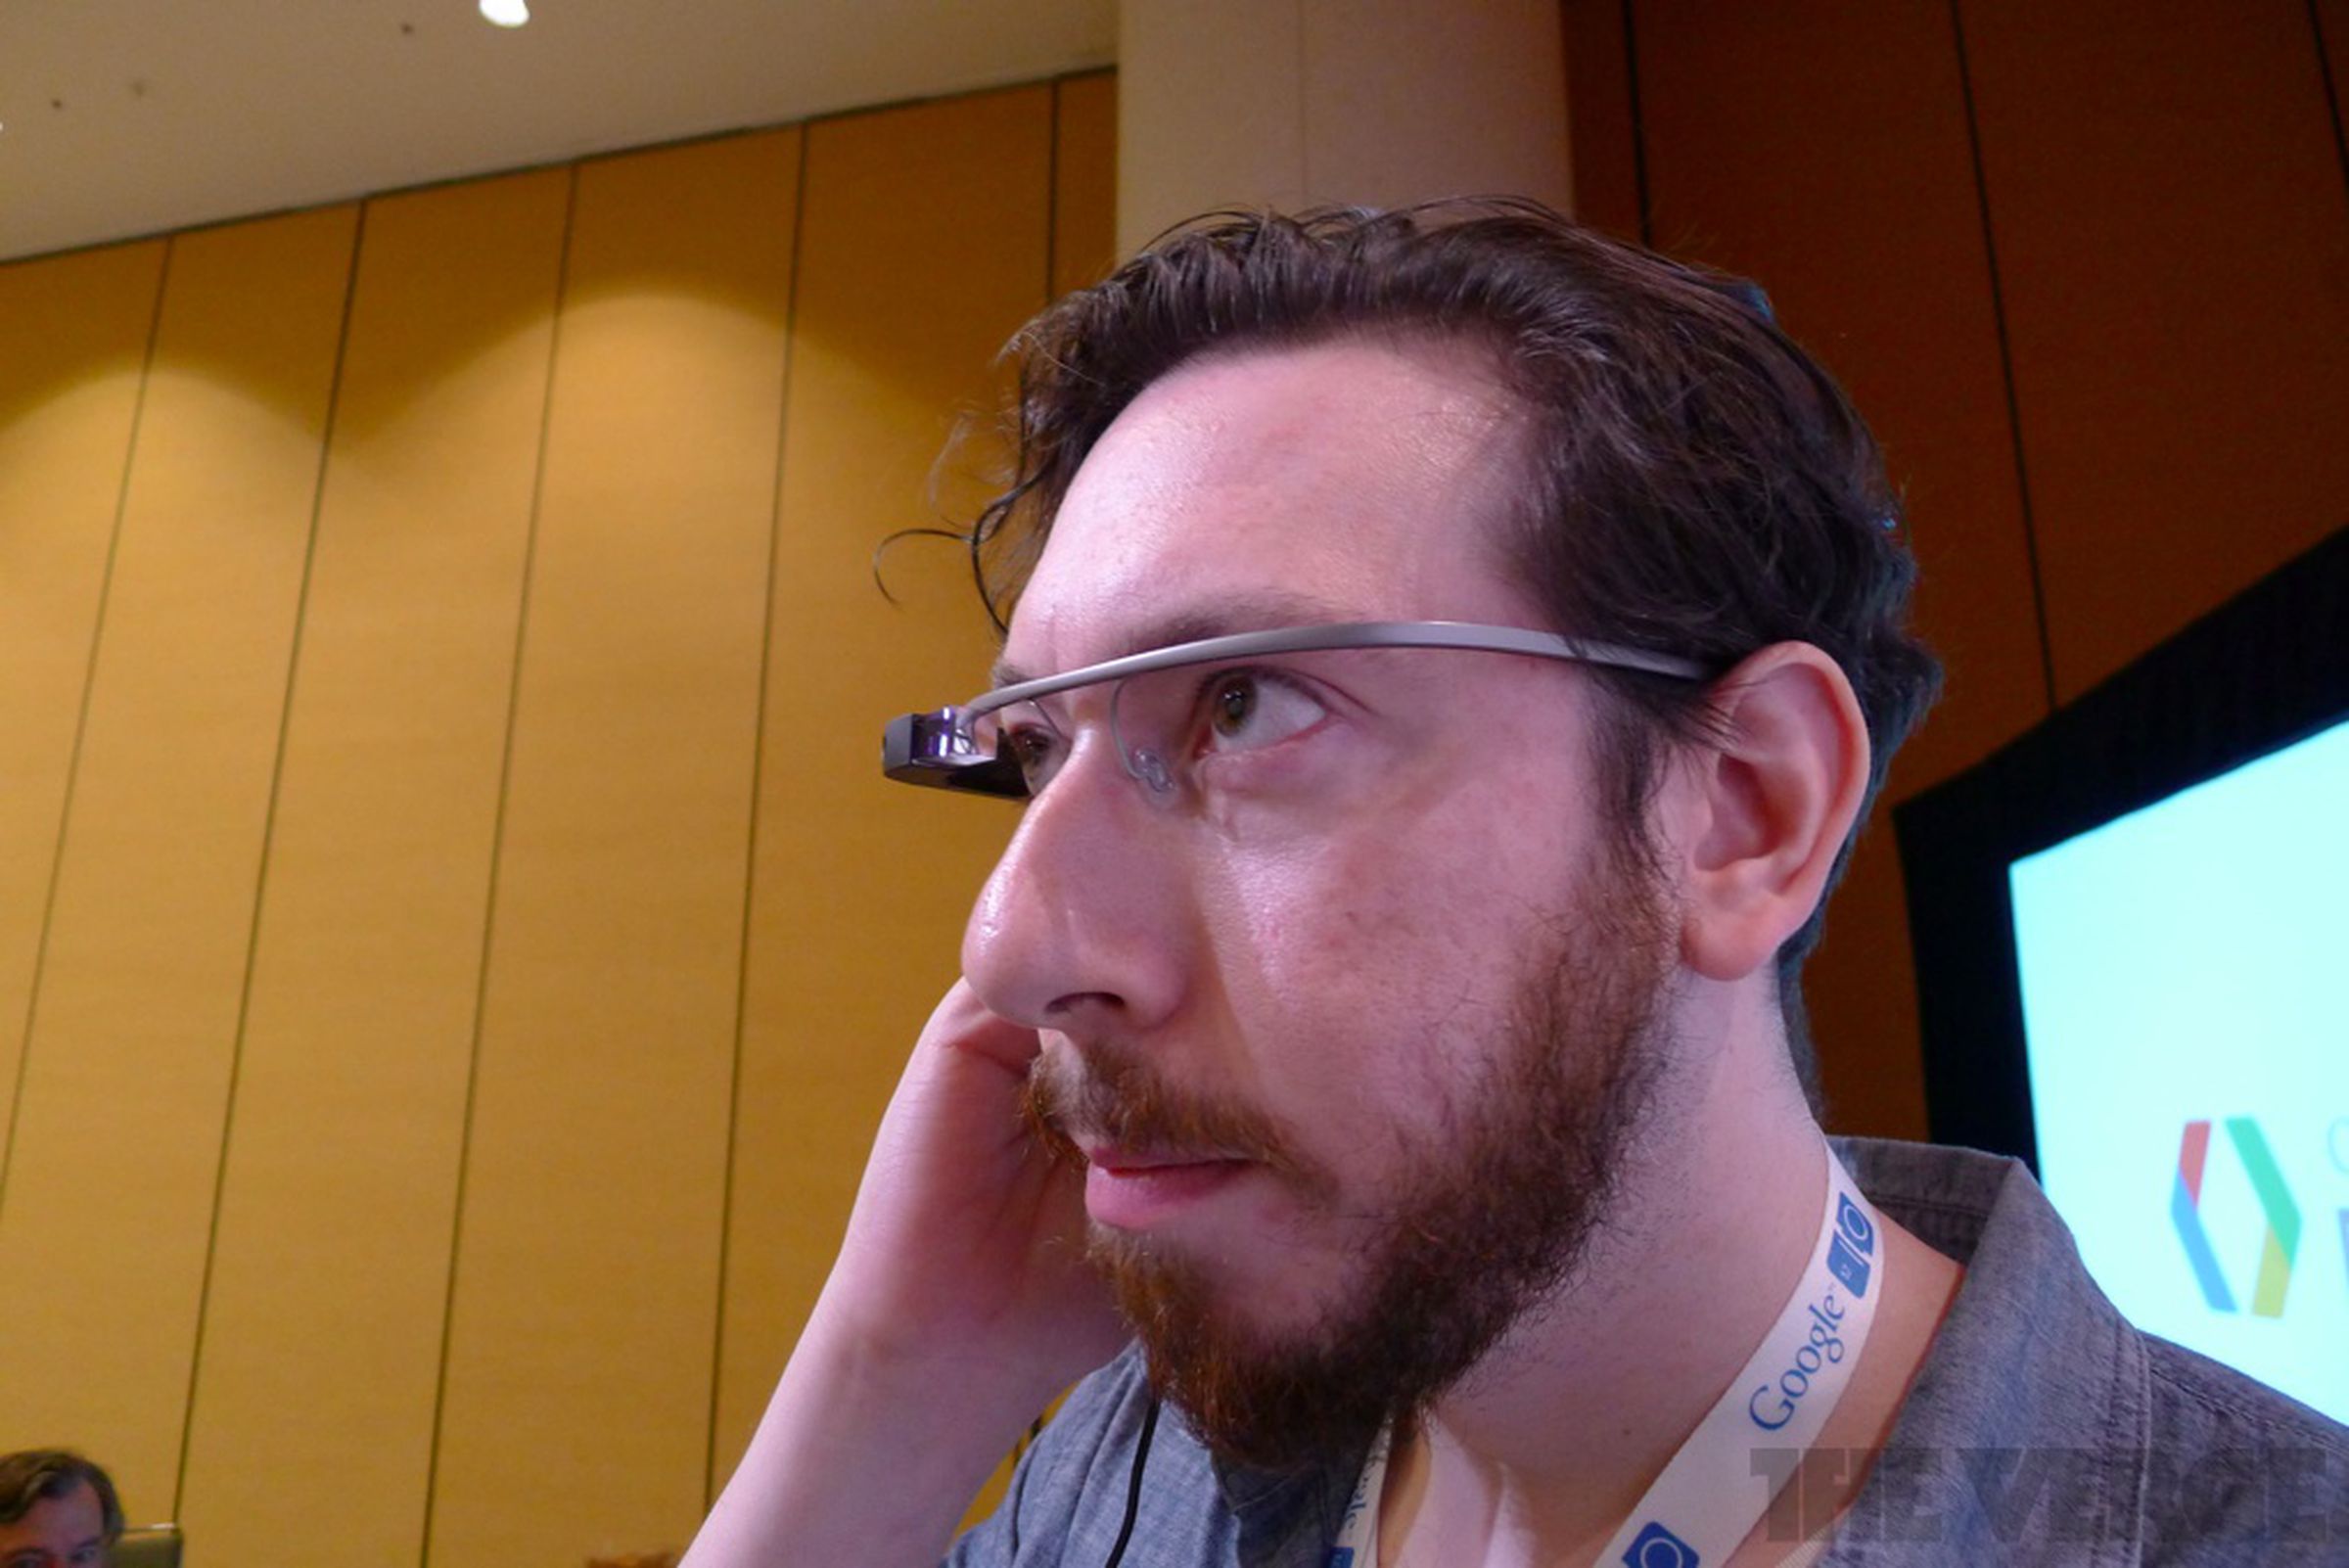 Trying out Sergey Brin's Glasses